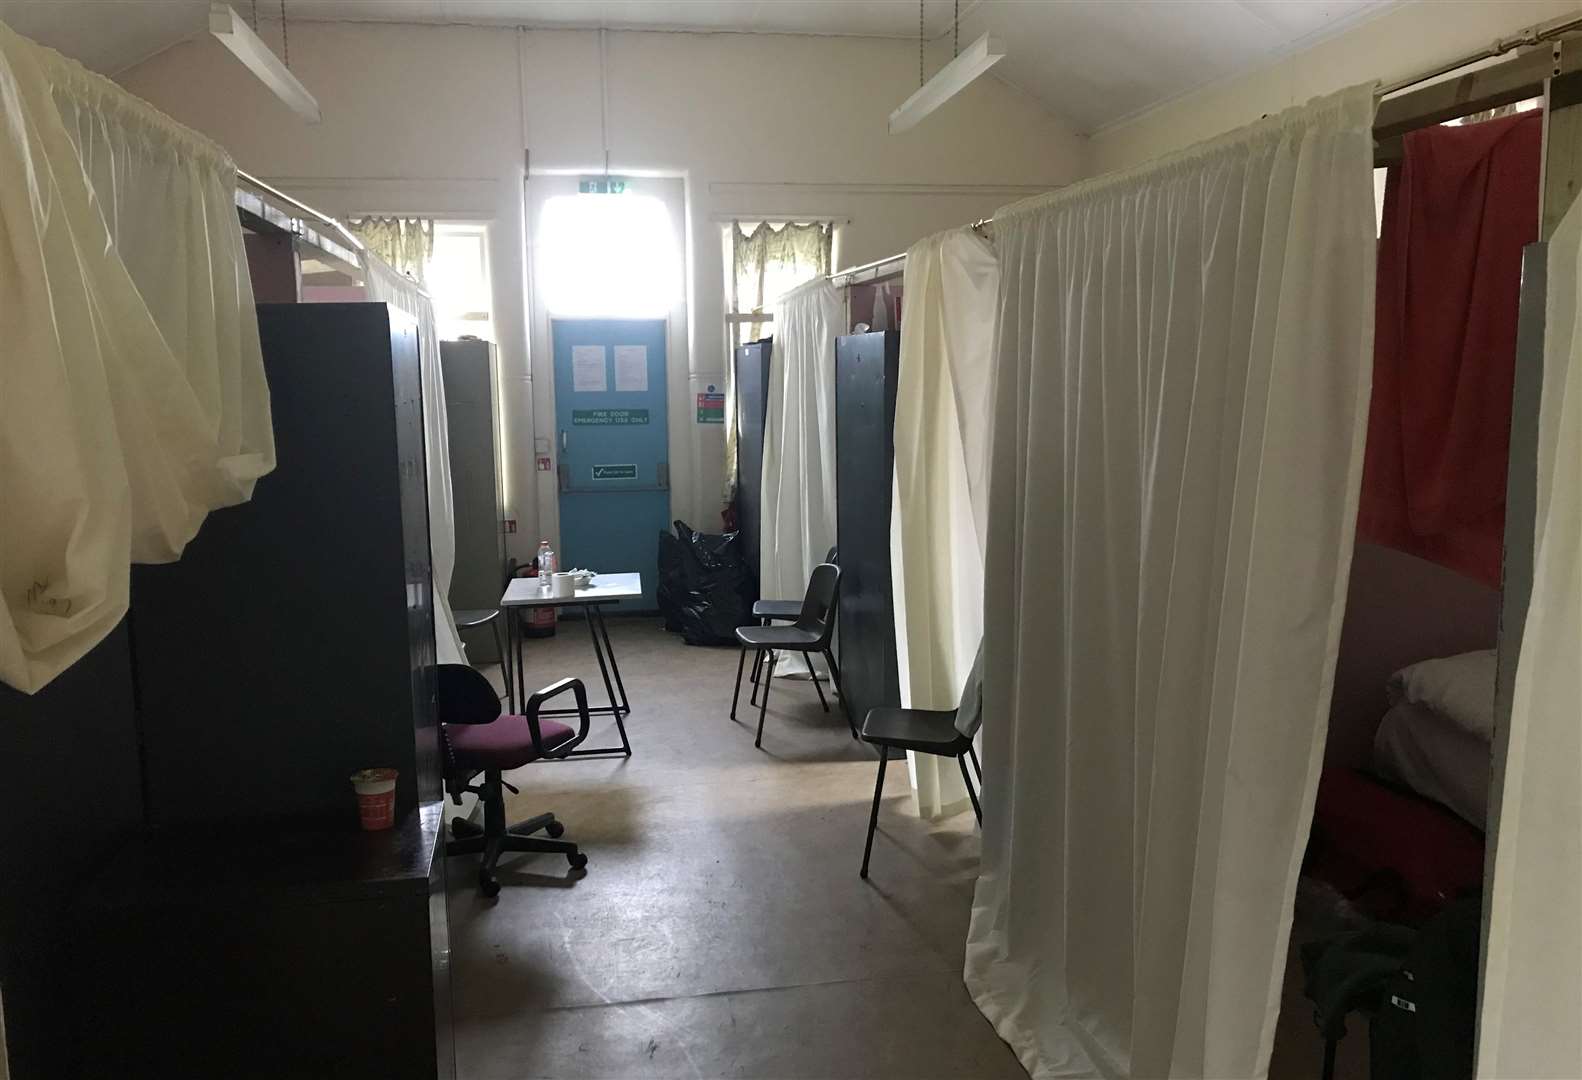 Inside Napier Barracks in Folkestone, where asylum seekers have been living. Picture: Independent Chief Inspector of Borders and Immigration